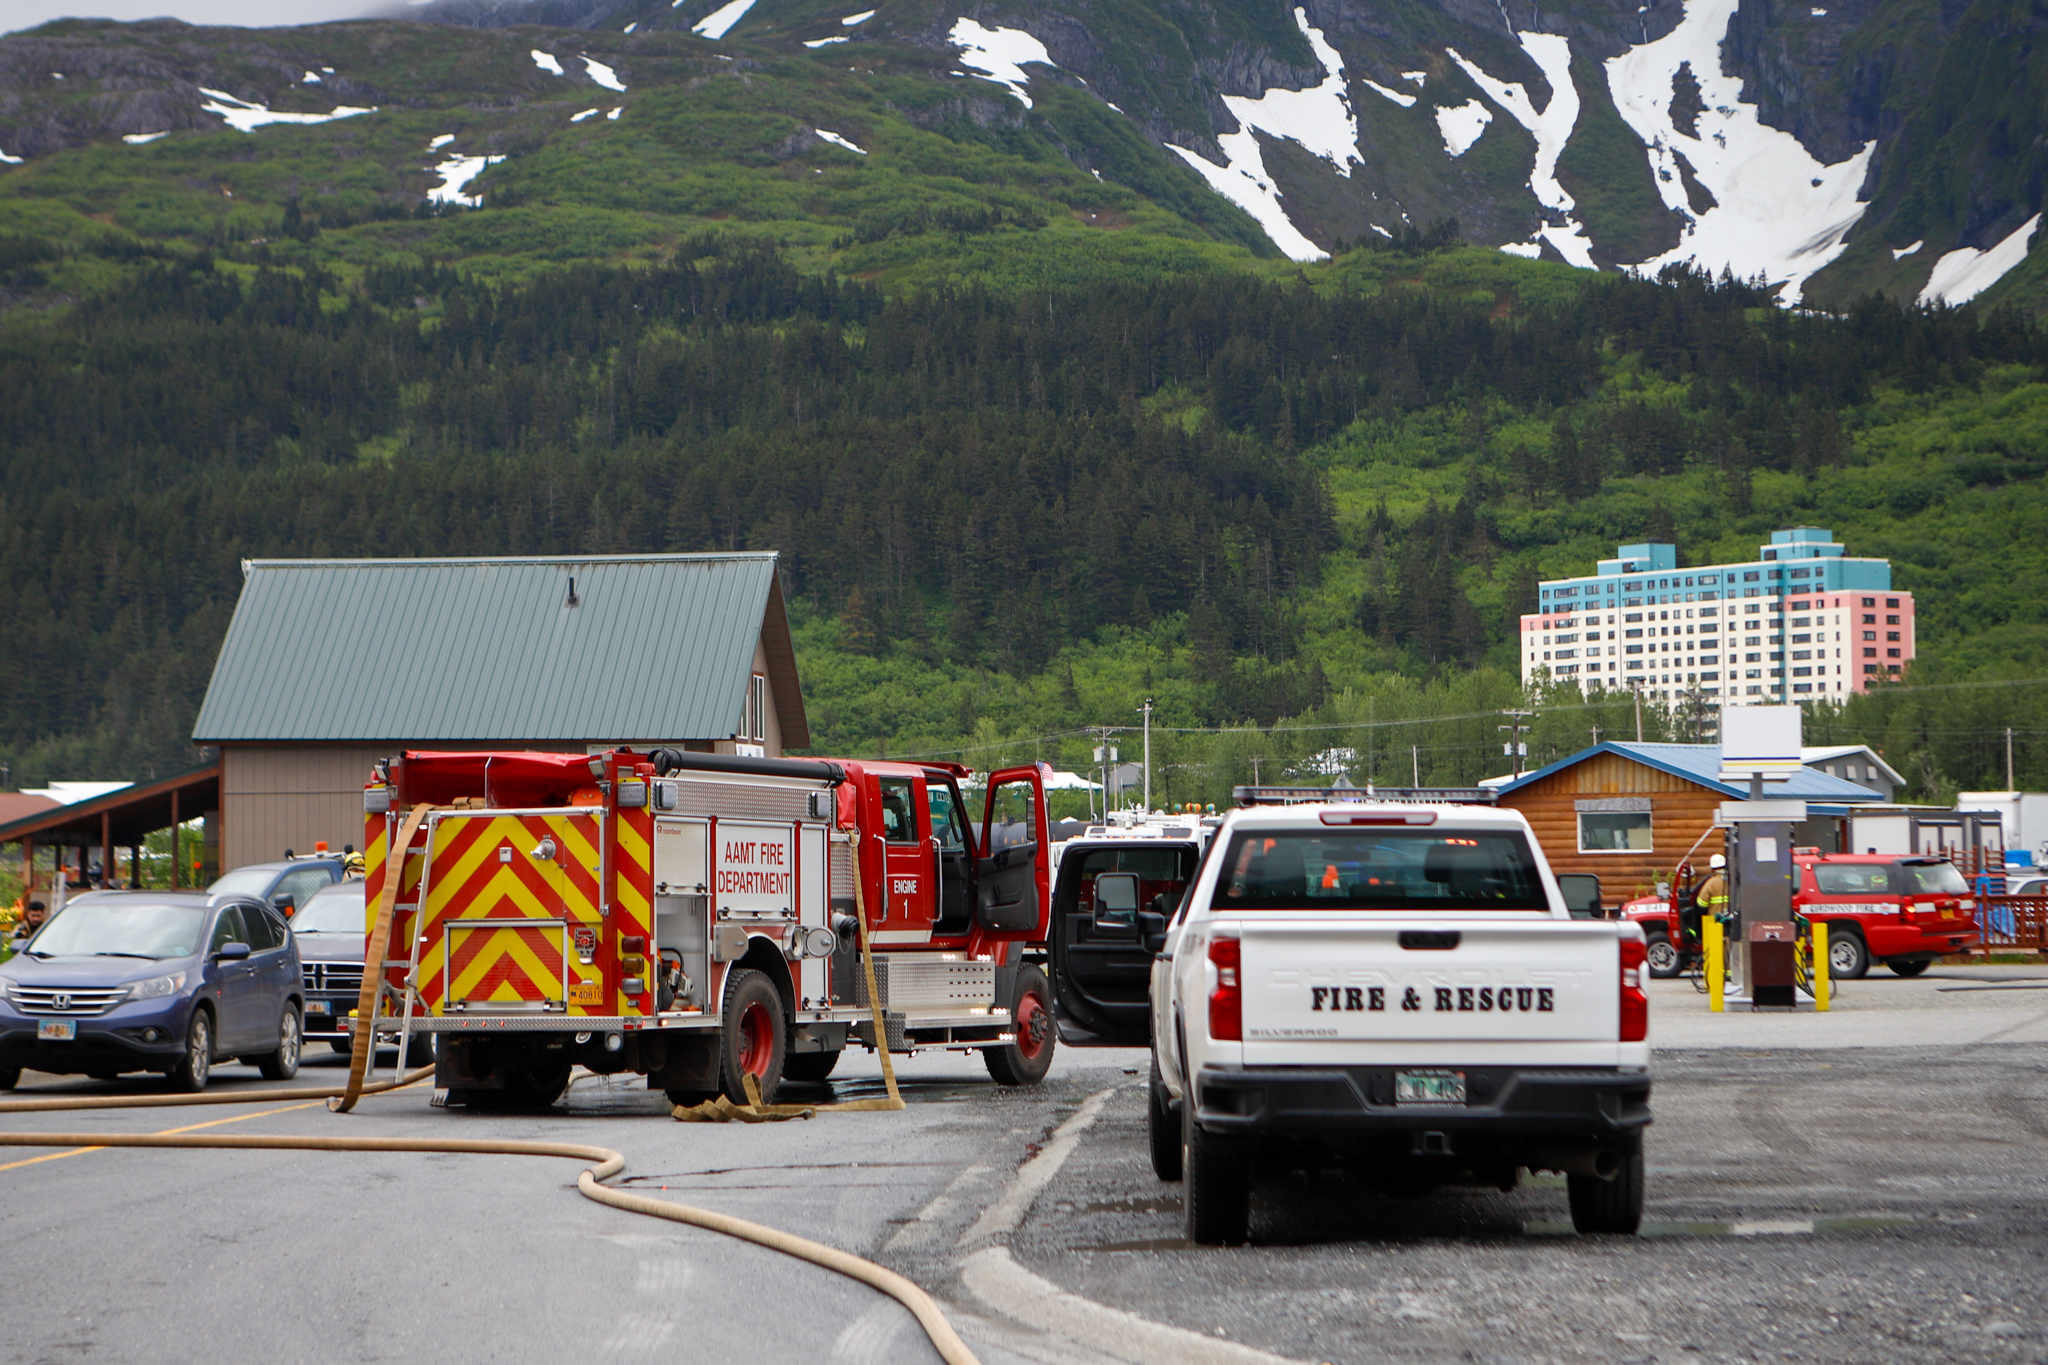 Fire trucks and hoses in front of a green, snow-capped mountain.